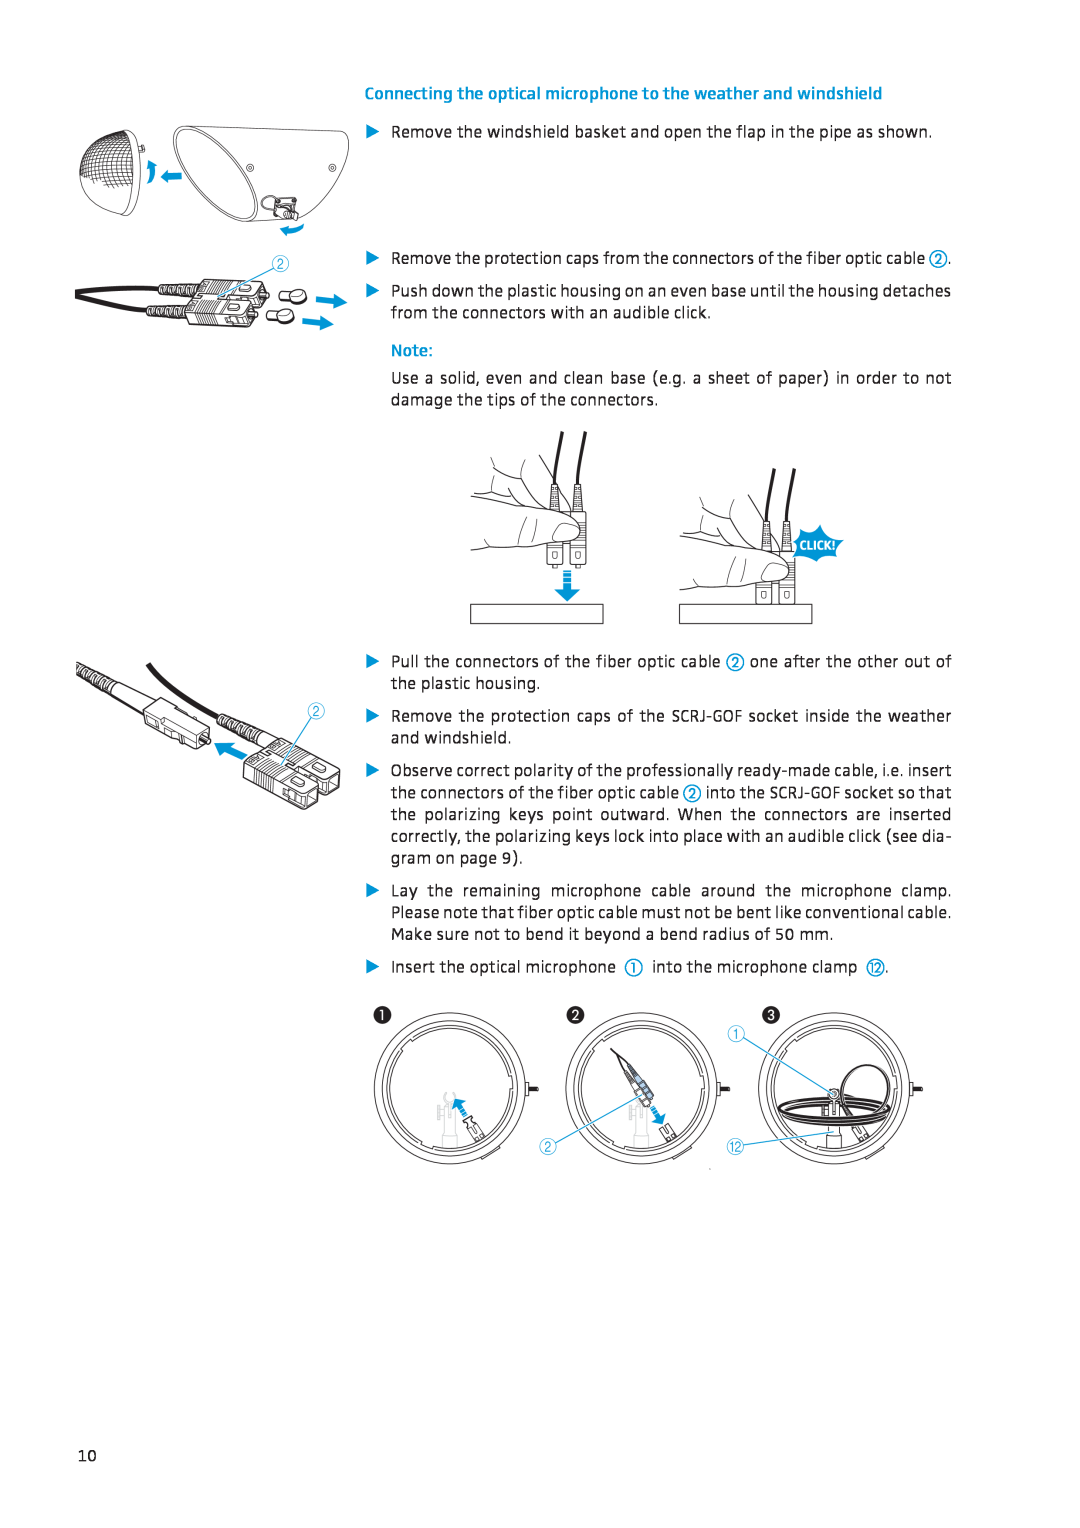 Sennheiser IAS-MO 2000 manual Connecting the optical microphone to the weather and windshield 